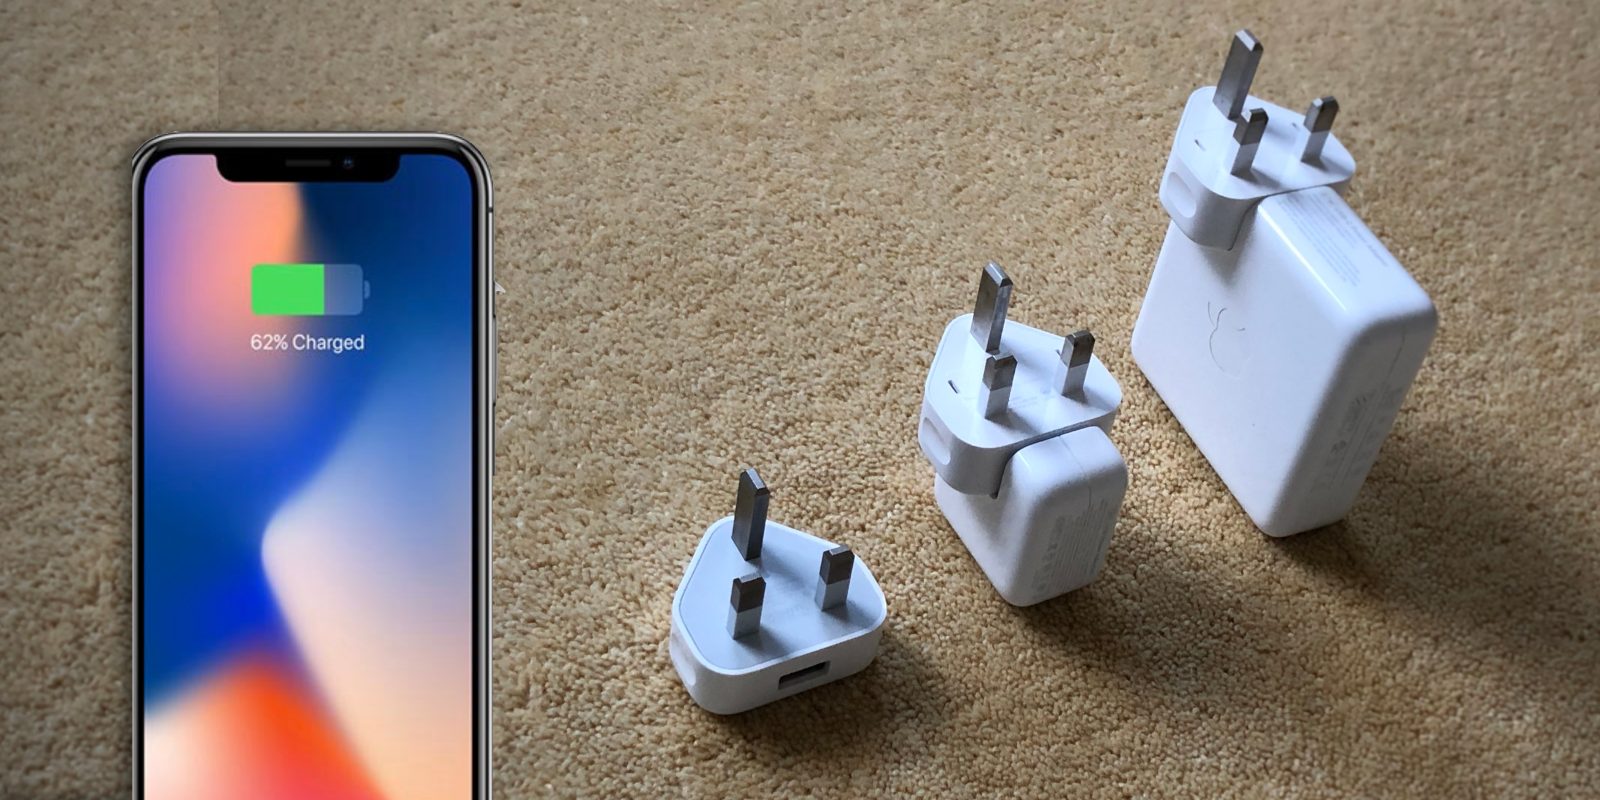 iPhone XR, iPhone XS charging slowly? Use a different charger